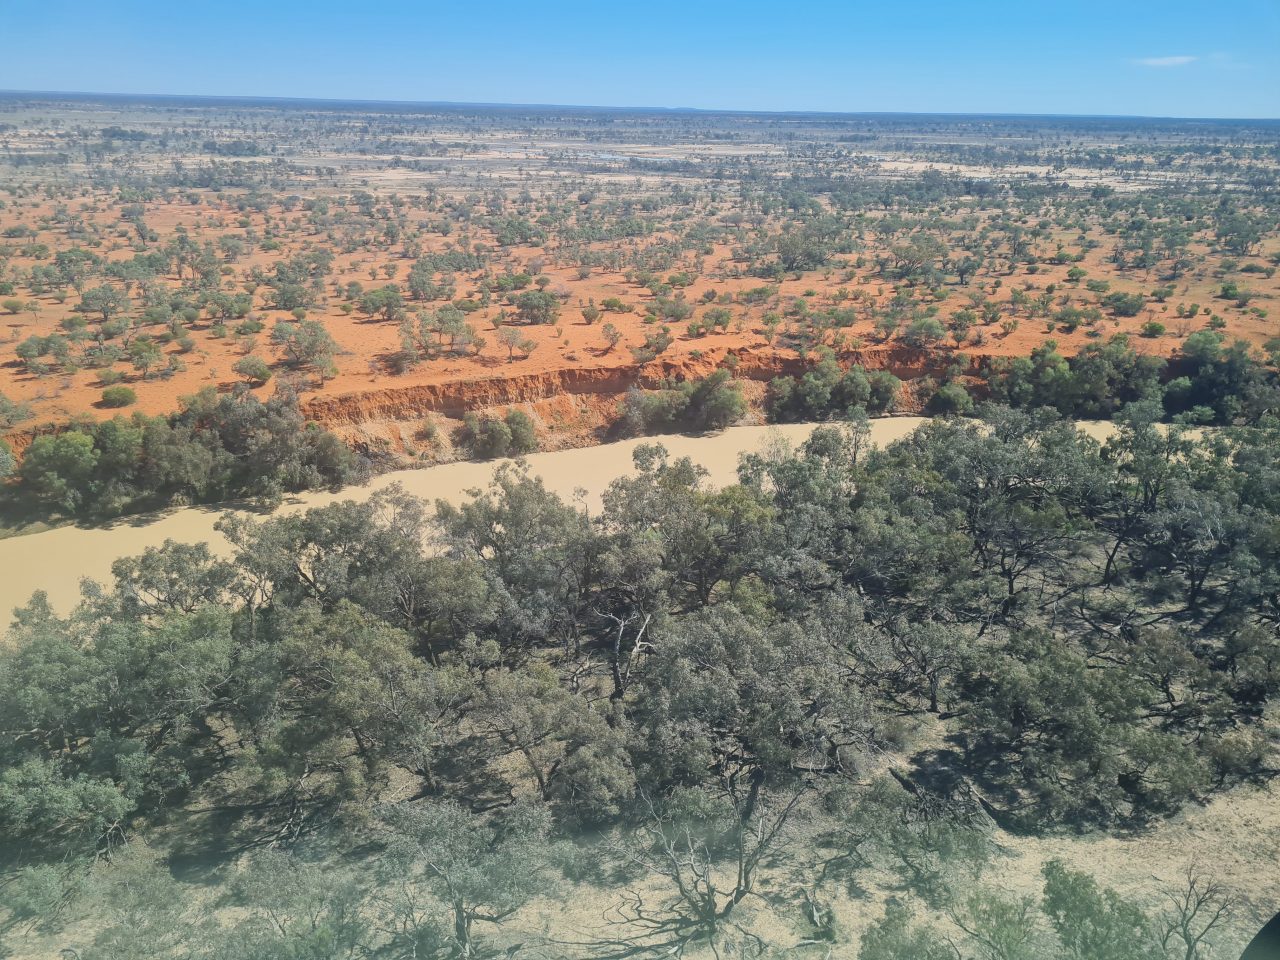 Aerial photo of steep cliff like river bank being cut of bright orange sand dune by flowing river full of beige water. Floodplain has consistent spread of vegetation in trees, shrubs and ground cover plants with orange soil exposed between.  Horizon is at the top of the picture and the sky is blue and clear